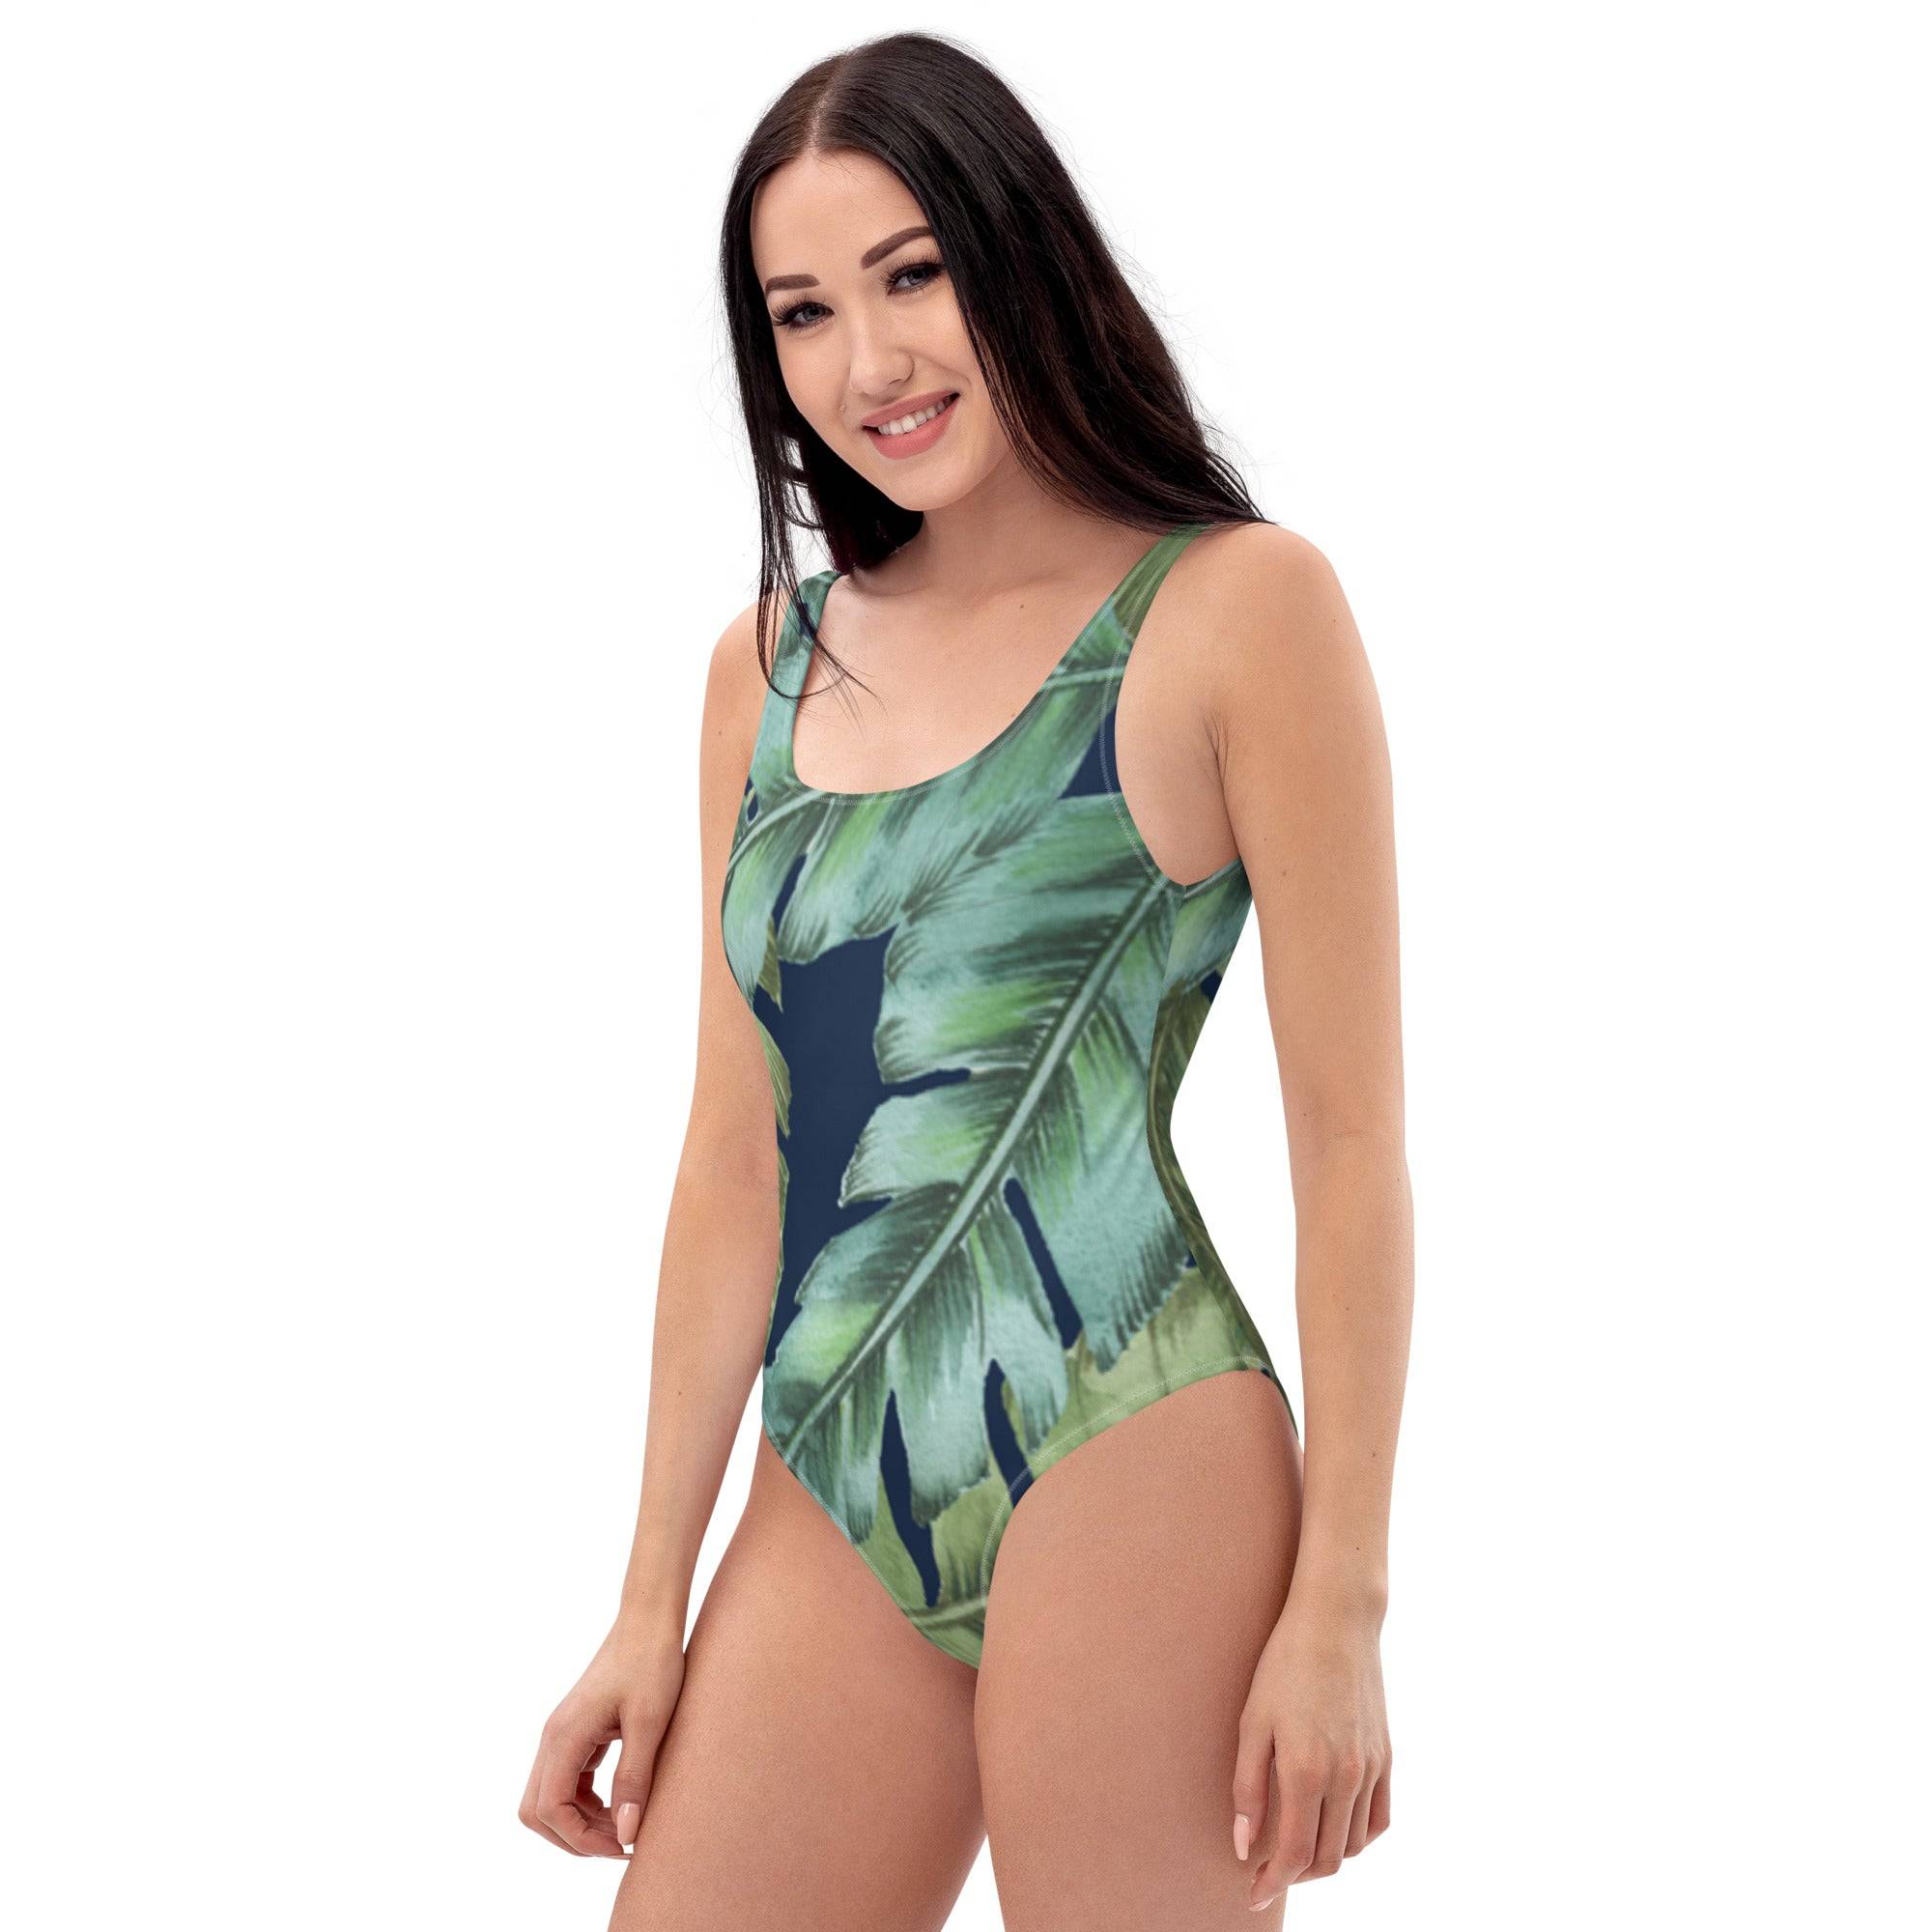 Flora One-Piece Swimsuit | One Piece Swimwear Australia - Revive Wear     One Piece Swimwear Australia. Find Your Perfect Fit. Low scoop back with a Cheeky Fit, This Swimsuit Is Perfect For Any Activity. Browse Sizes today.